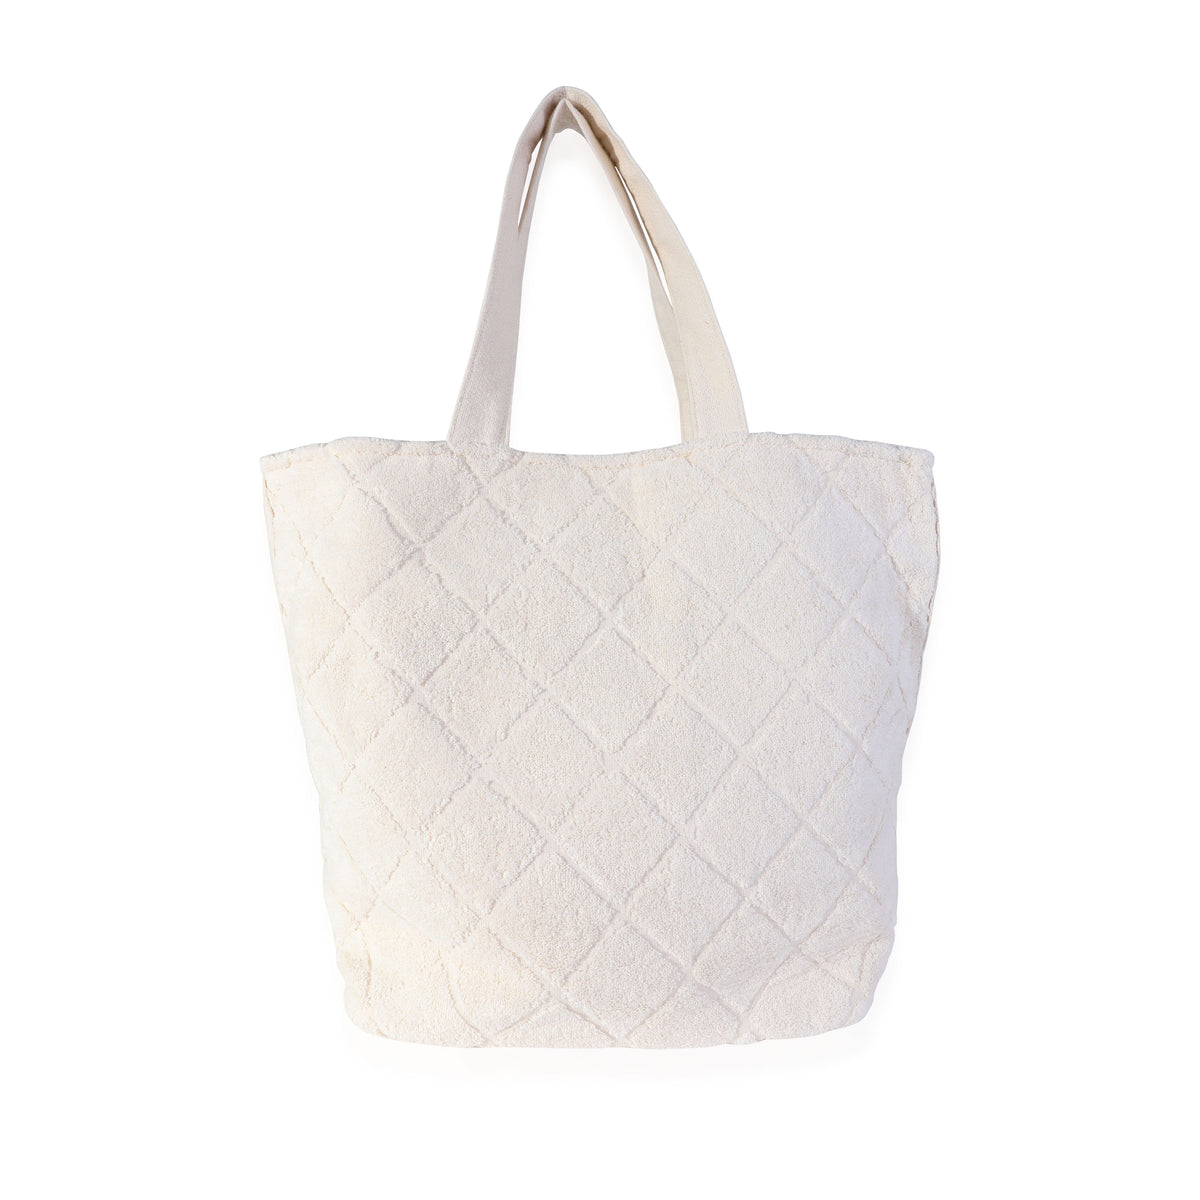 Chanel Cream Terry Beach Tote with Towel and Pouch, myGemma